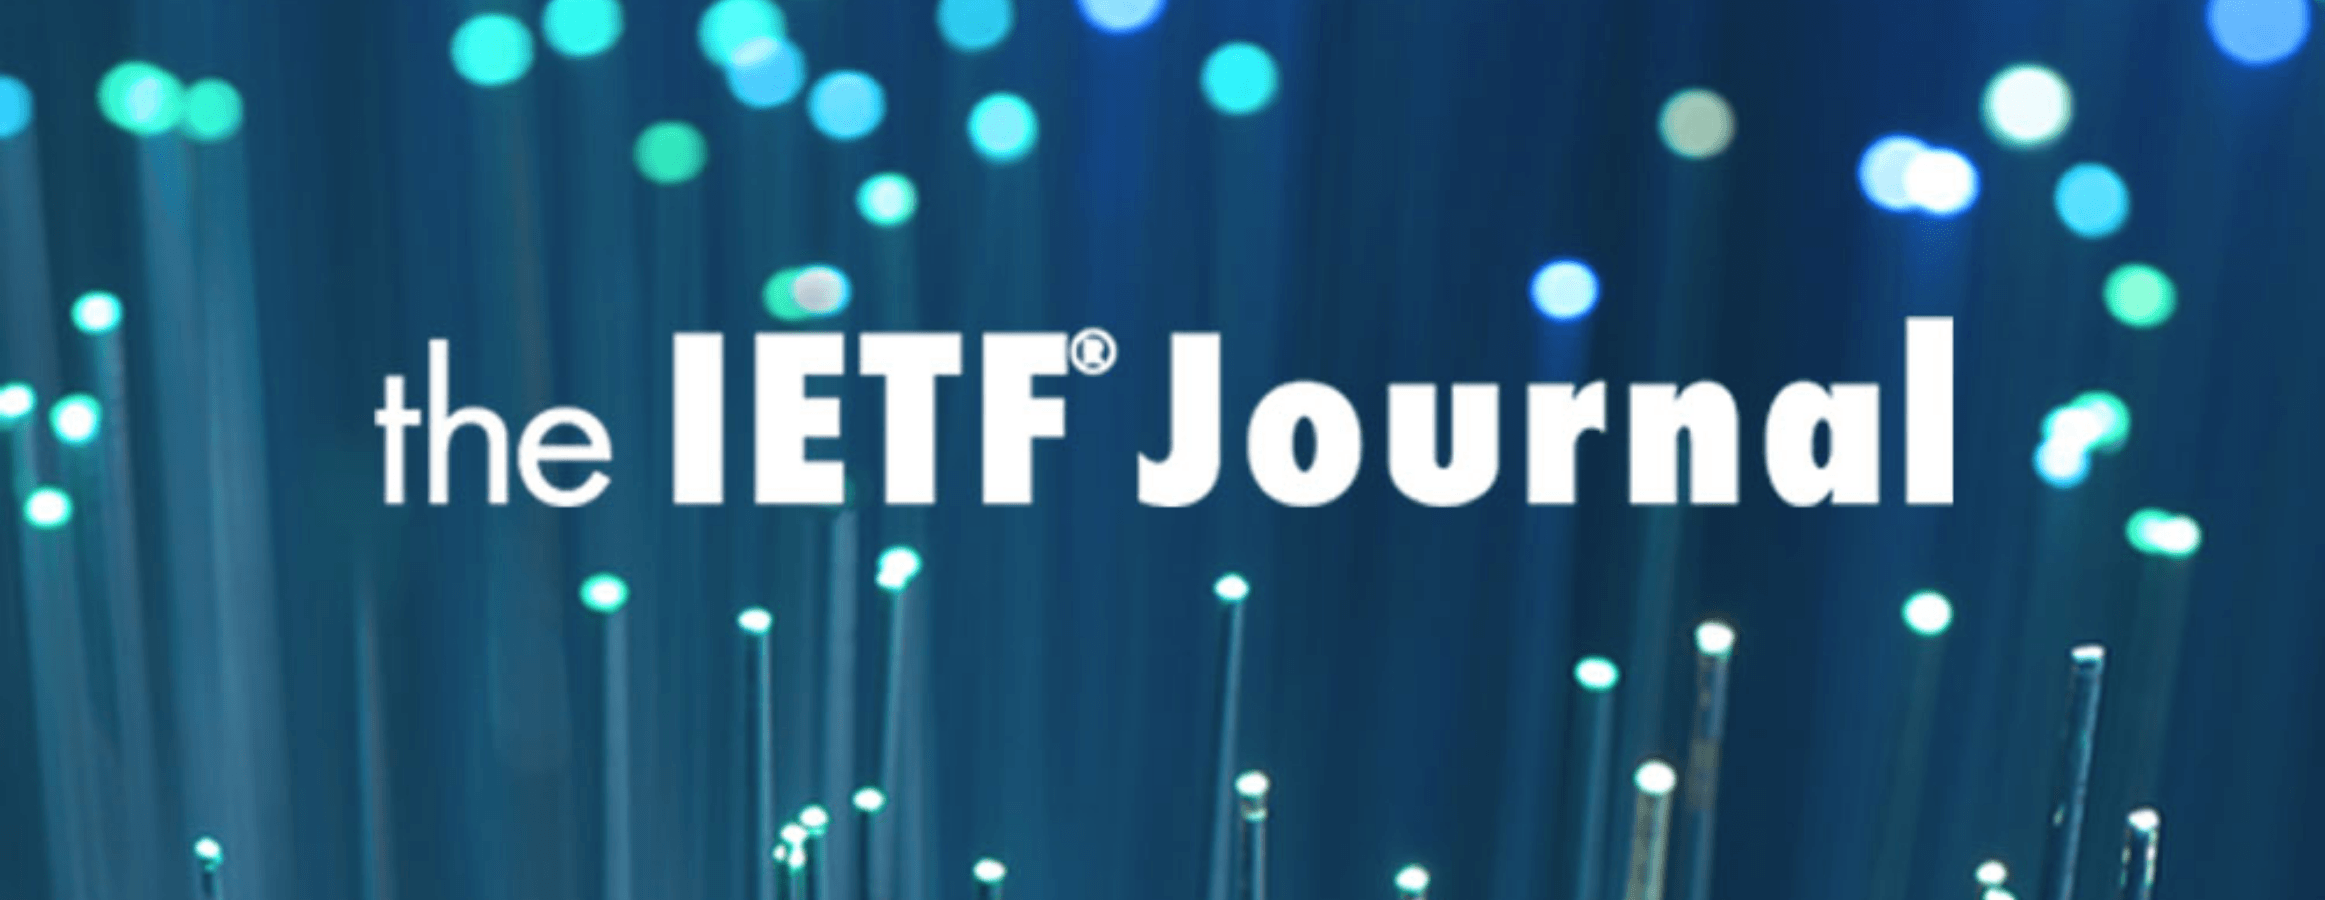 November 2017 IETF Journal Now Available Online Thumbnail